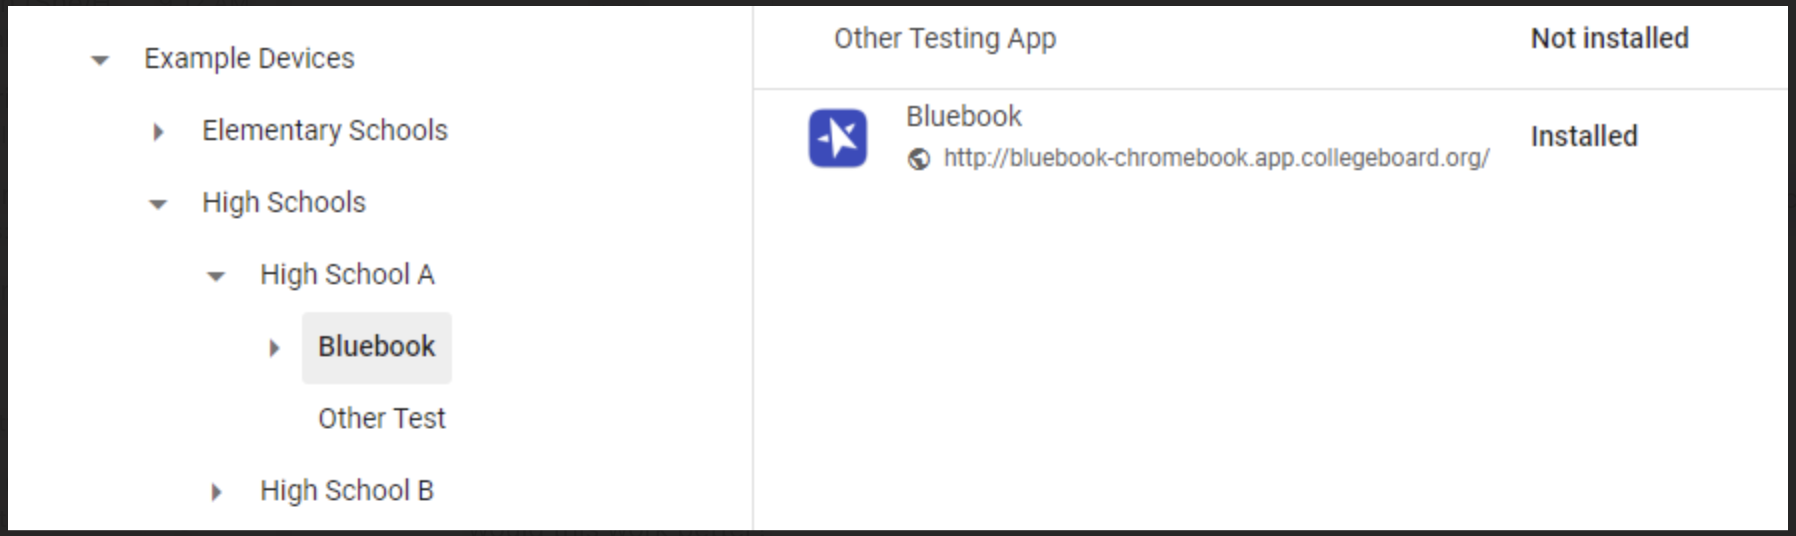 Figure 3 is a screenshot showing the Google admin console for High School A. The Other Testing App has been uninstalled from devices in the Bluebook organizational unit.